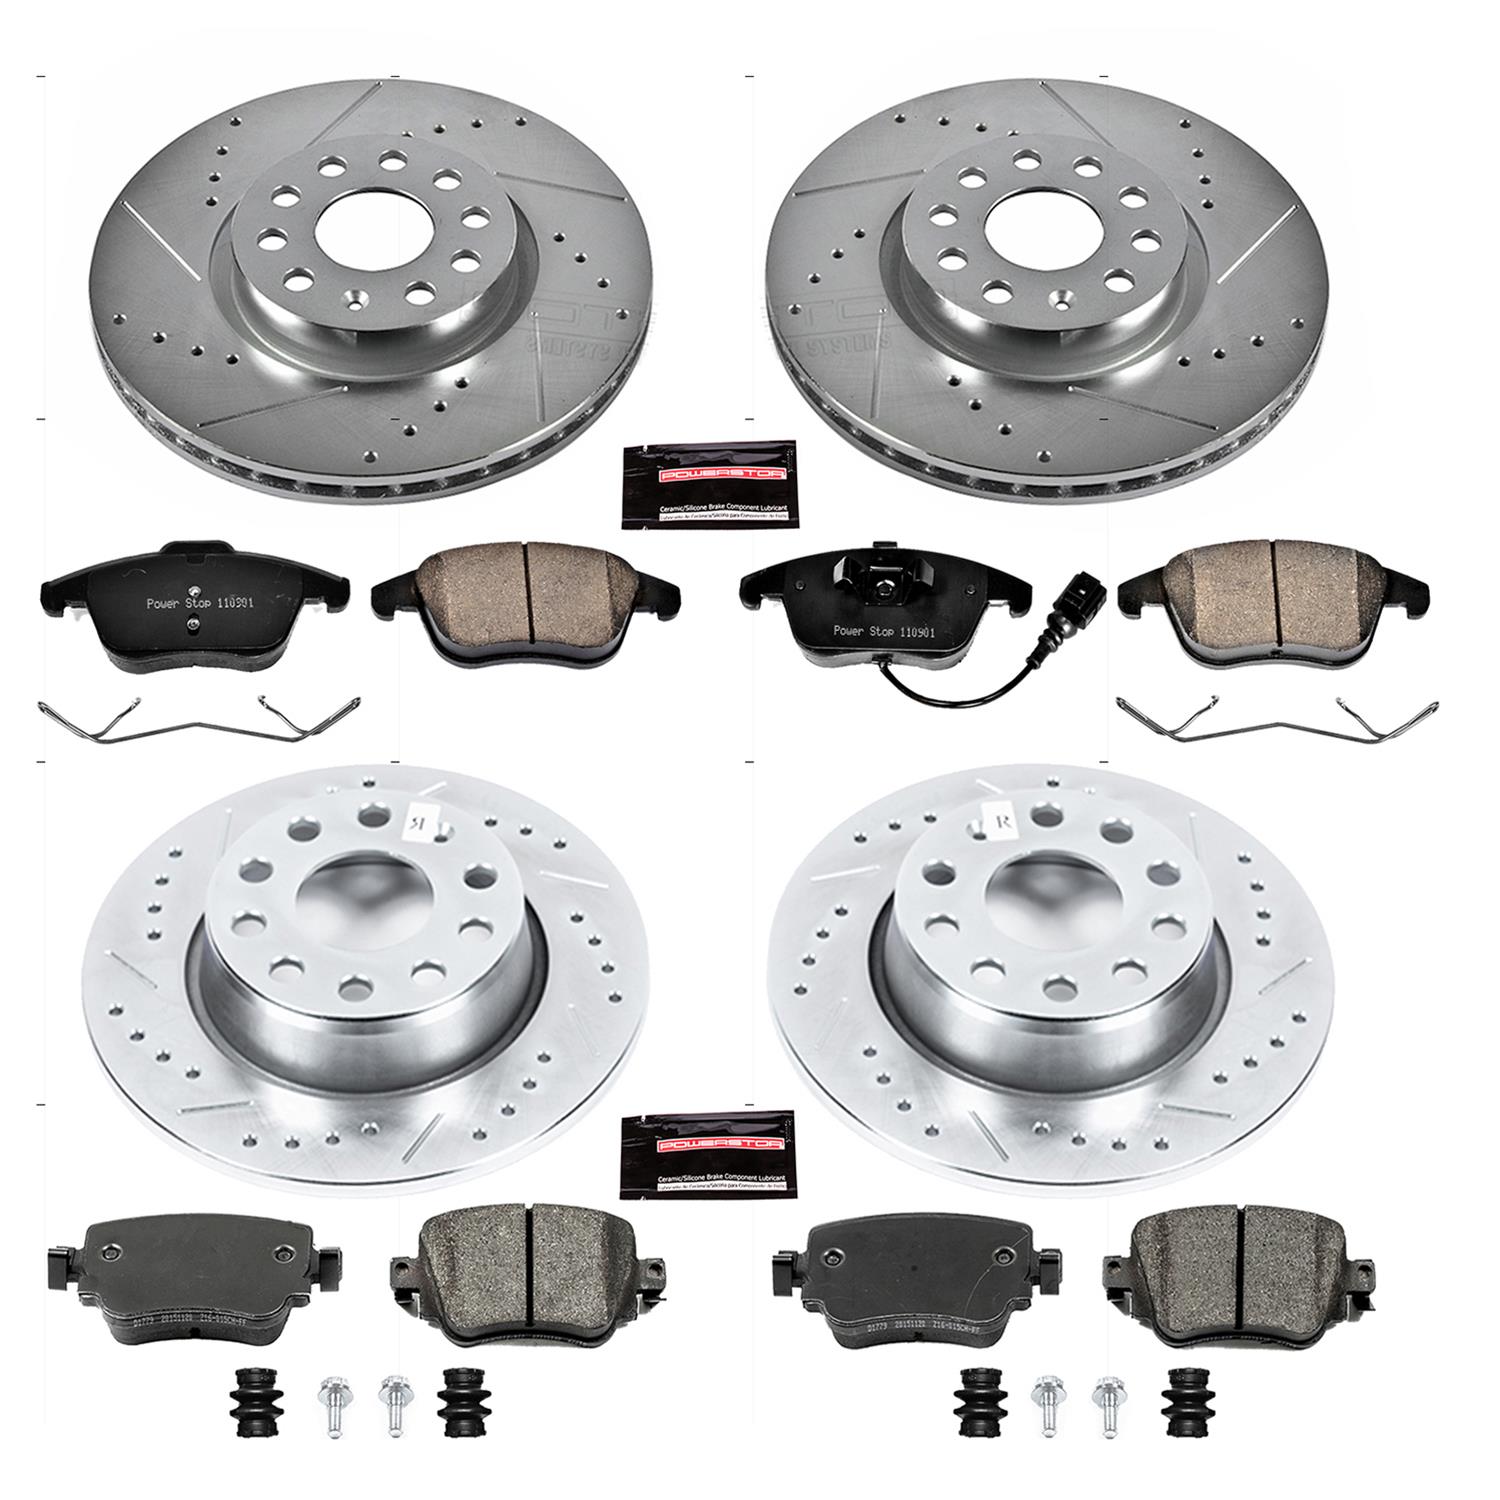 brembo REAR PADS Back Disc Brake Pad Set For Cars WITH 253 mm Discs for VW Jetta 